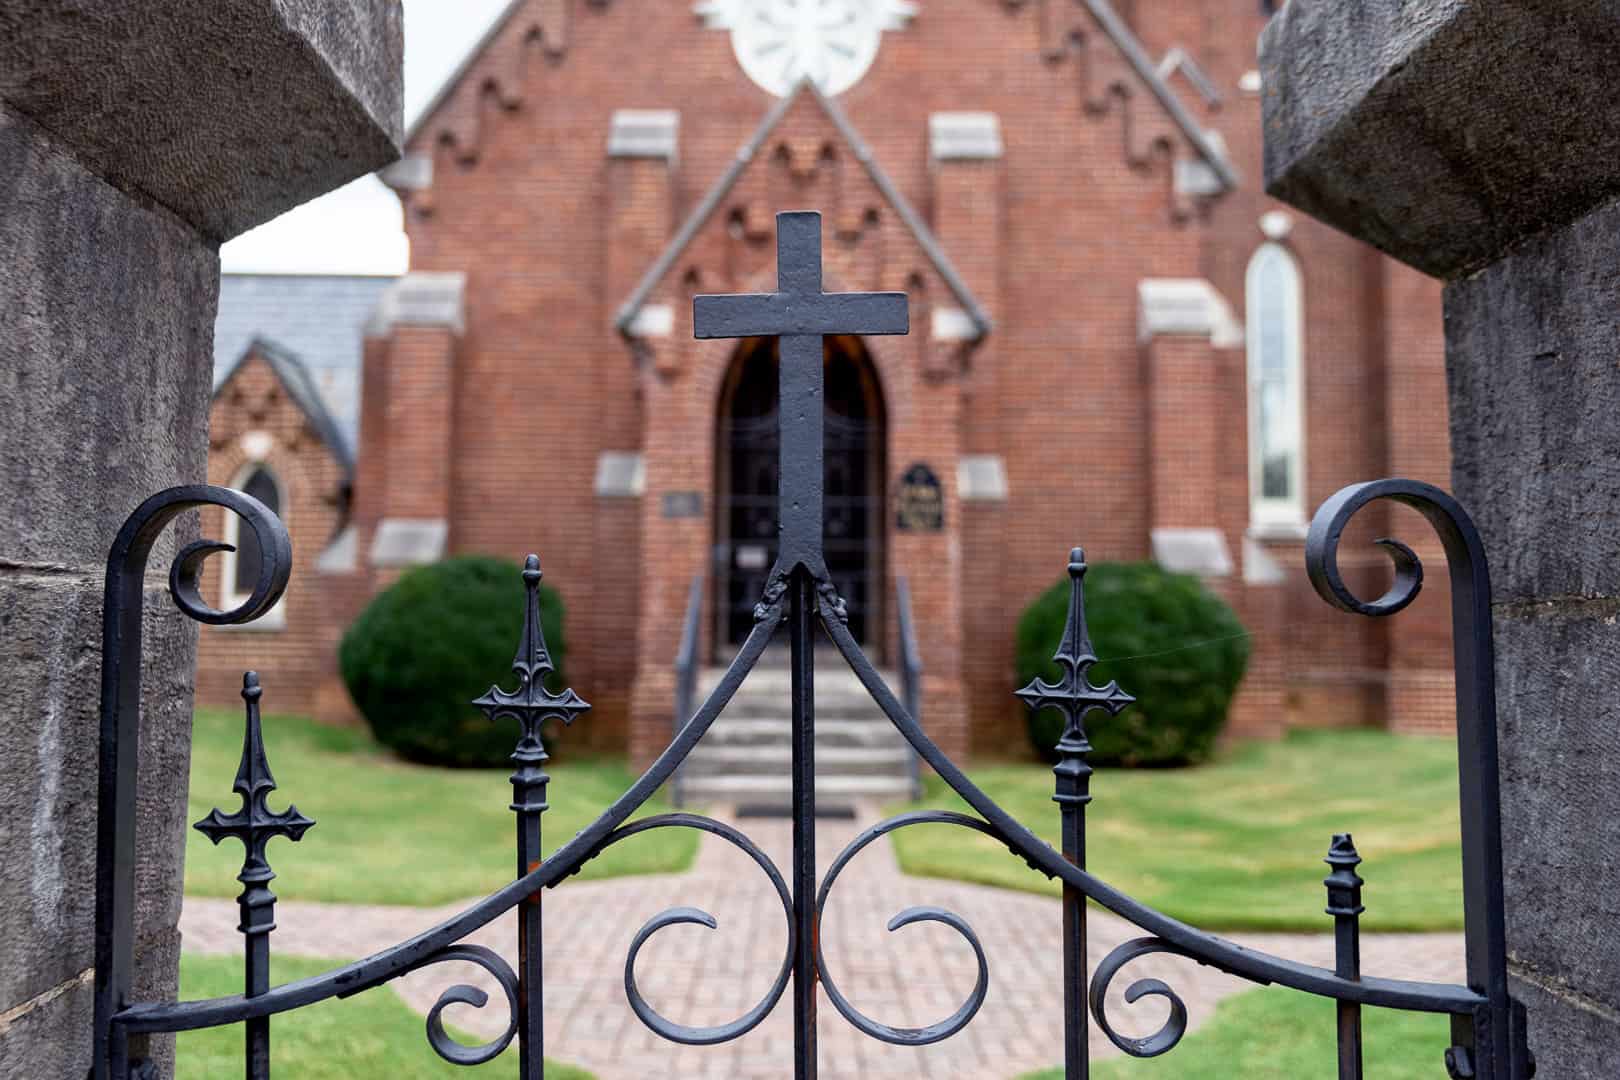 The chapel entrance with massive wooden doors and red brick and white stone entrance of St. Luke's Episcopal Church in Cleveland, TN is seen from the sidewalk and through the historic wrought iron sidewalk gate. The iron cross adorong the top of the gate is in focus and centered in the frame.